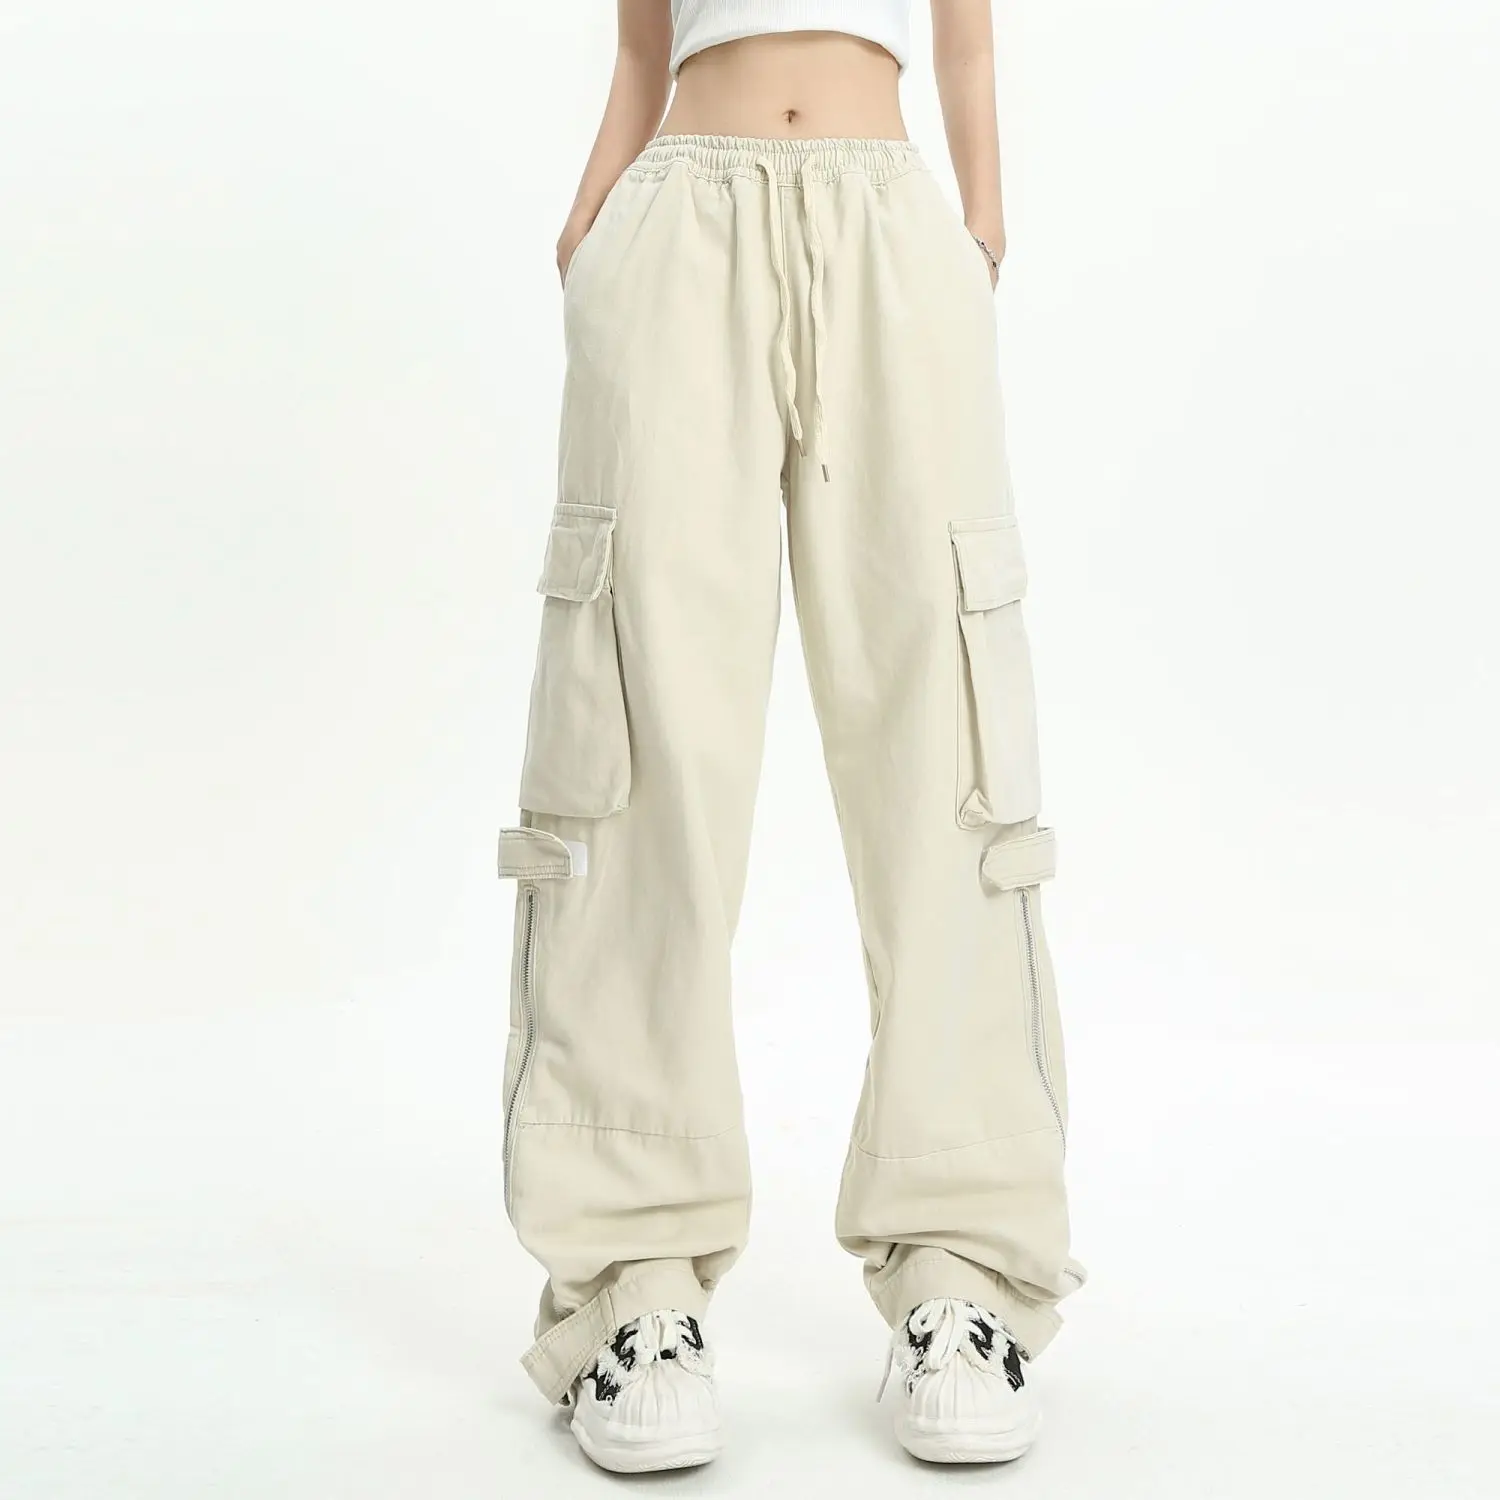 Vintage Women's Cargo Pants Solid Color Streetwear Low Waist Trousers Female 2022 Autumn Overalls Baggy Straight Pants